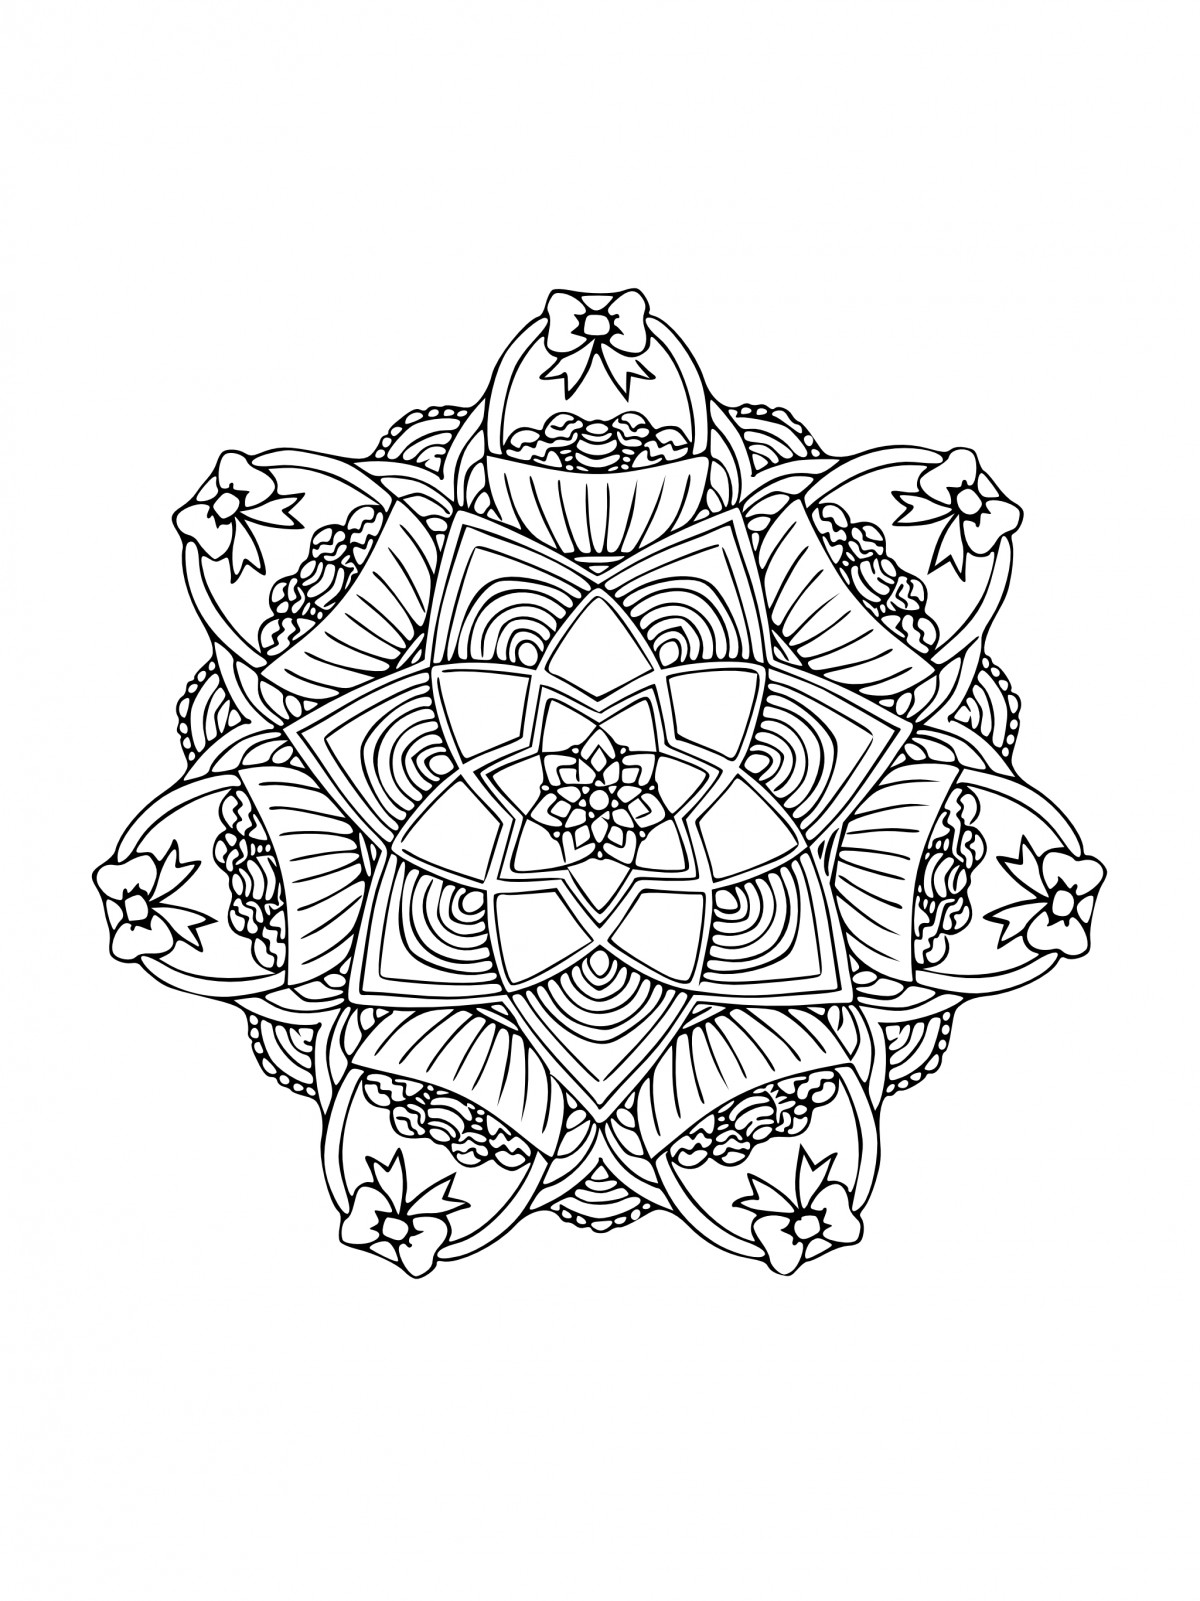 Adult Coloring Pages Printable – Easter Mandalas to color 